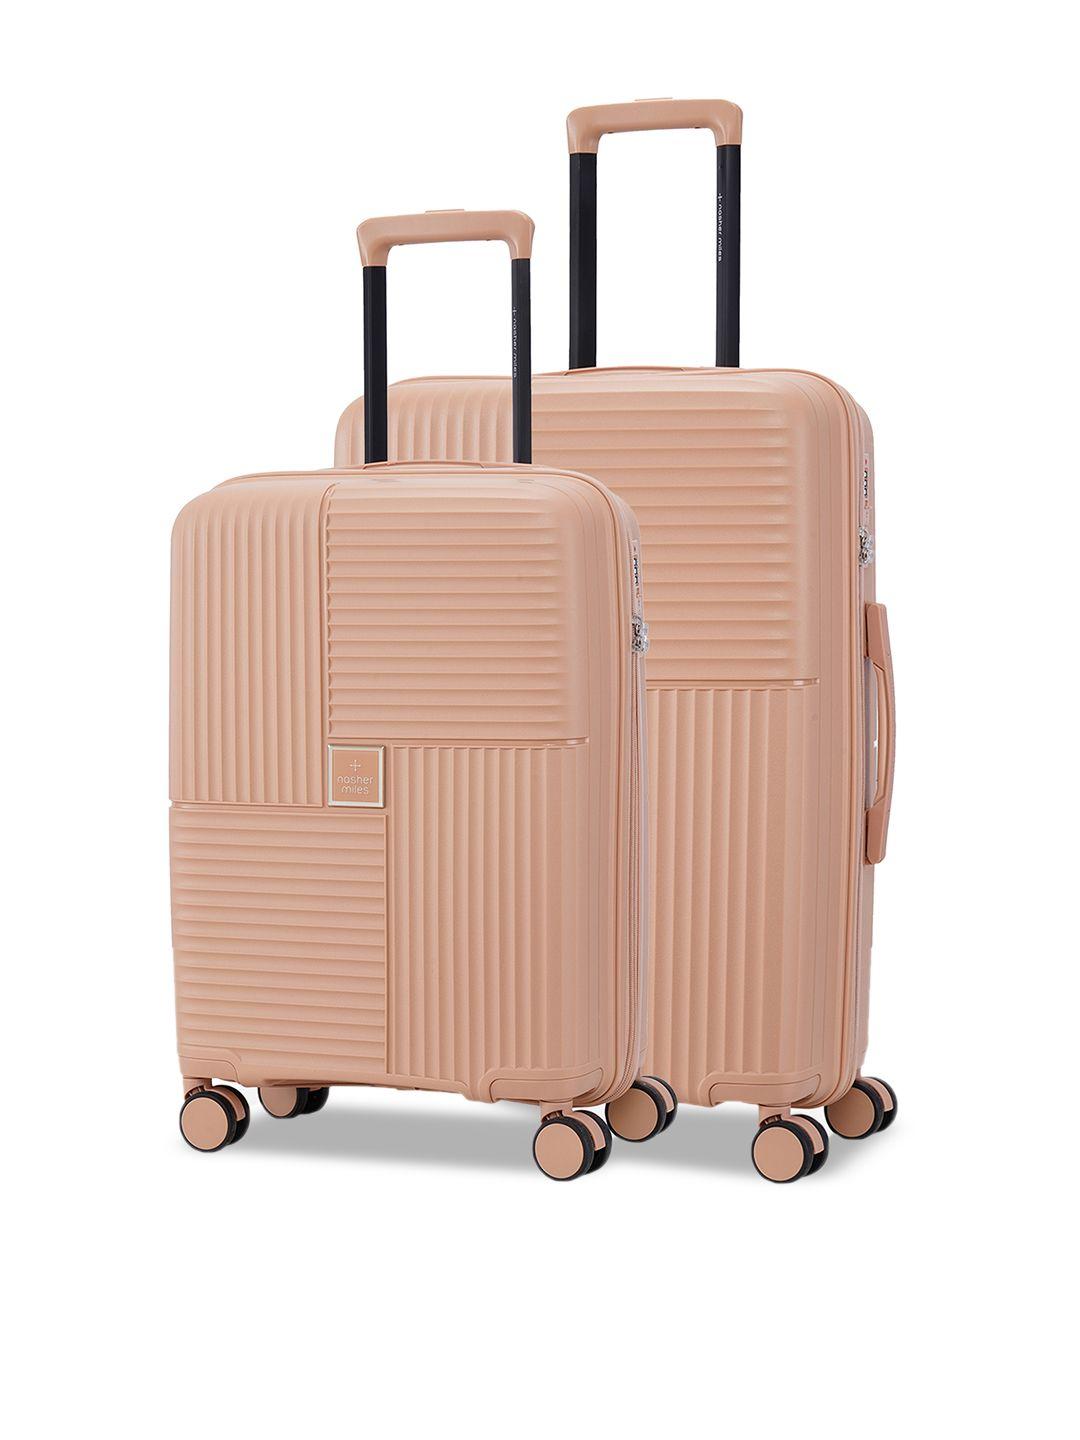 nasher miles singapore set of 2 textured light weight hard-sided trolley suitcases